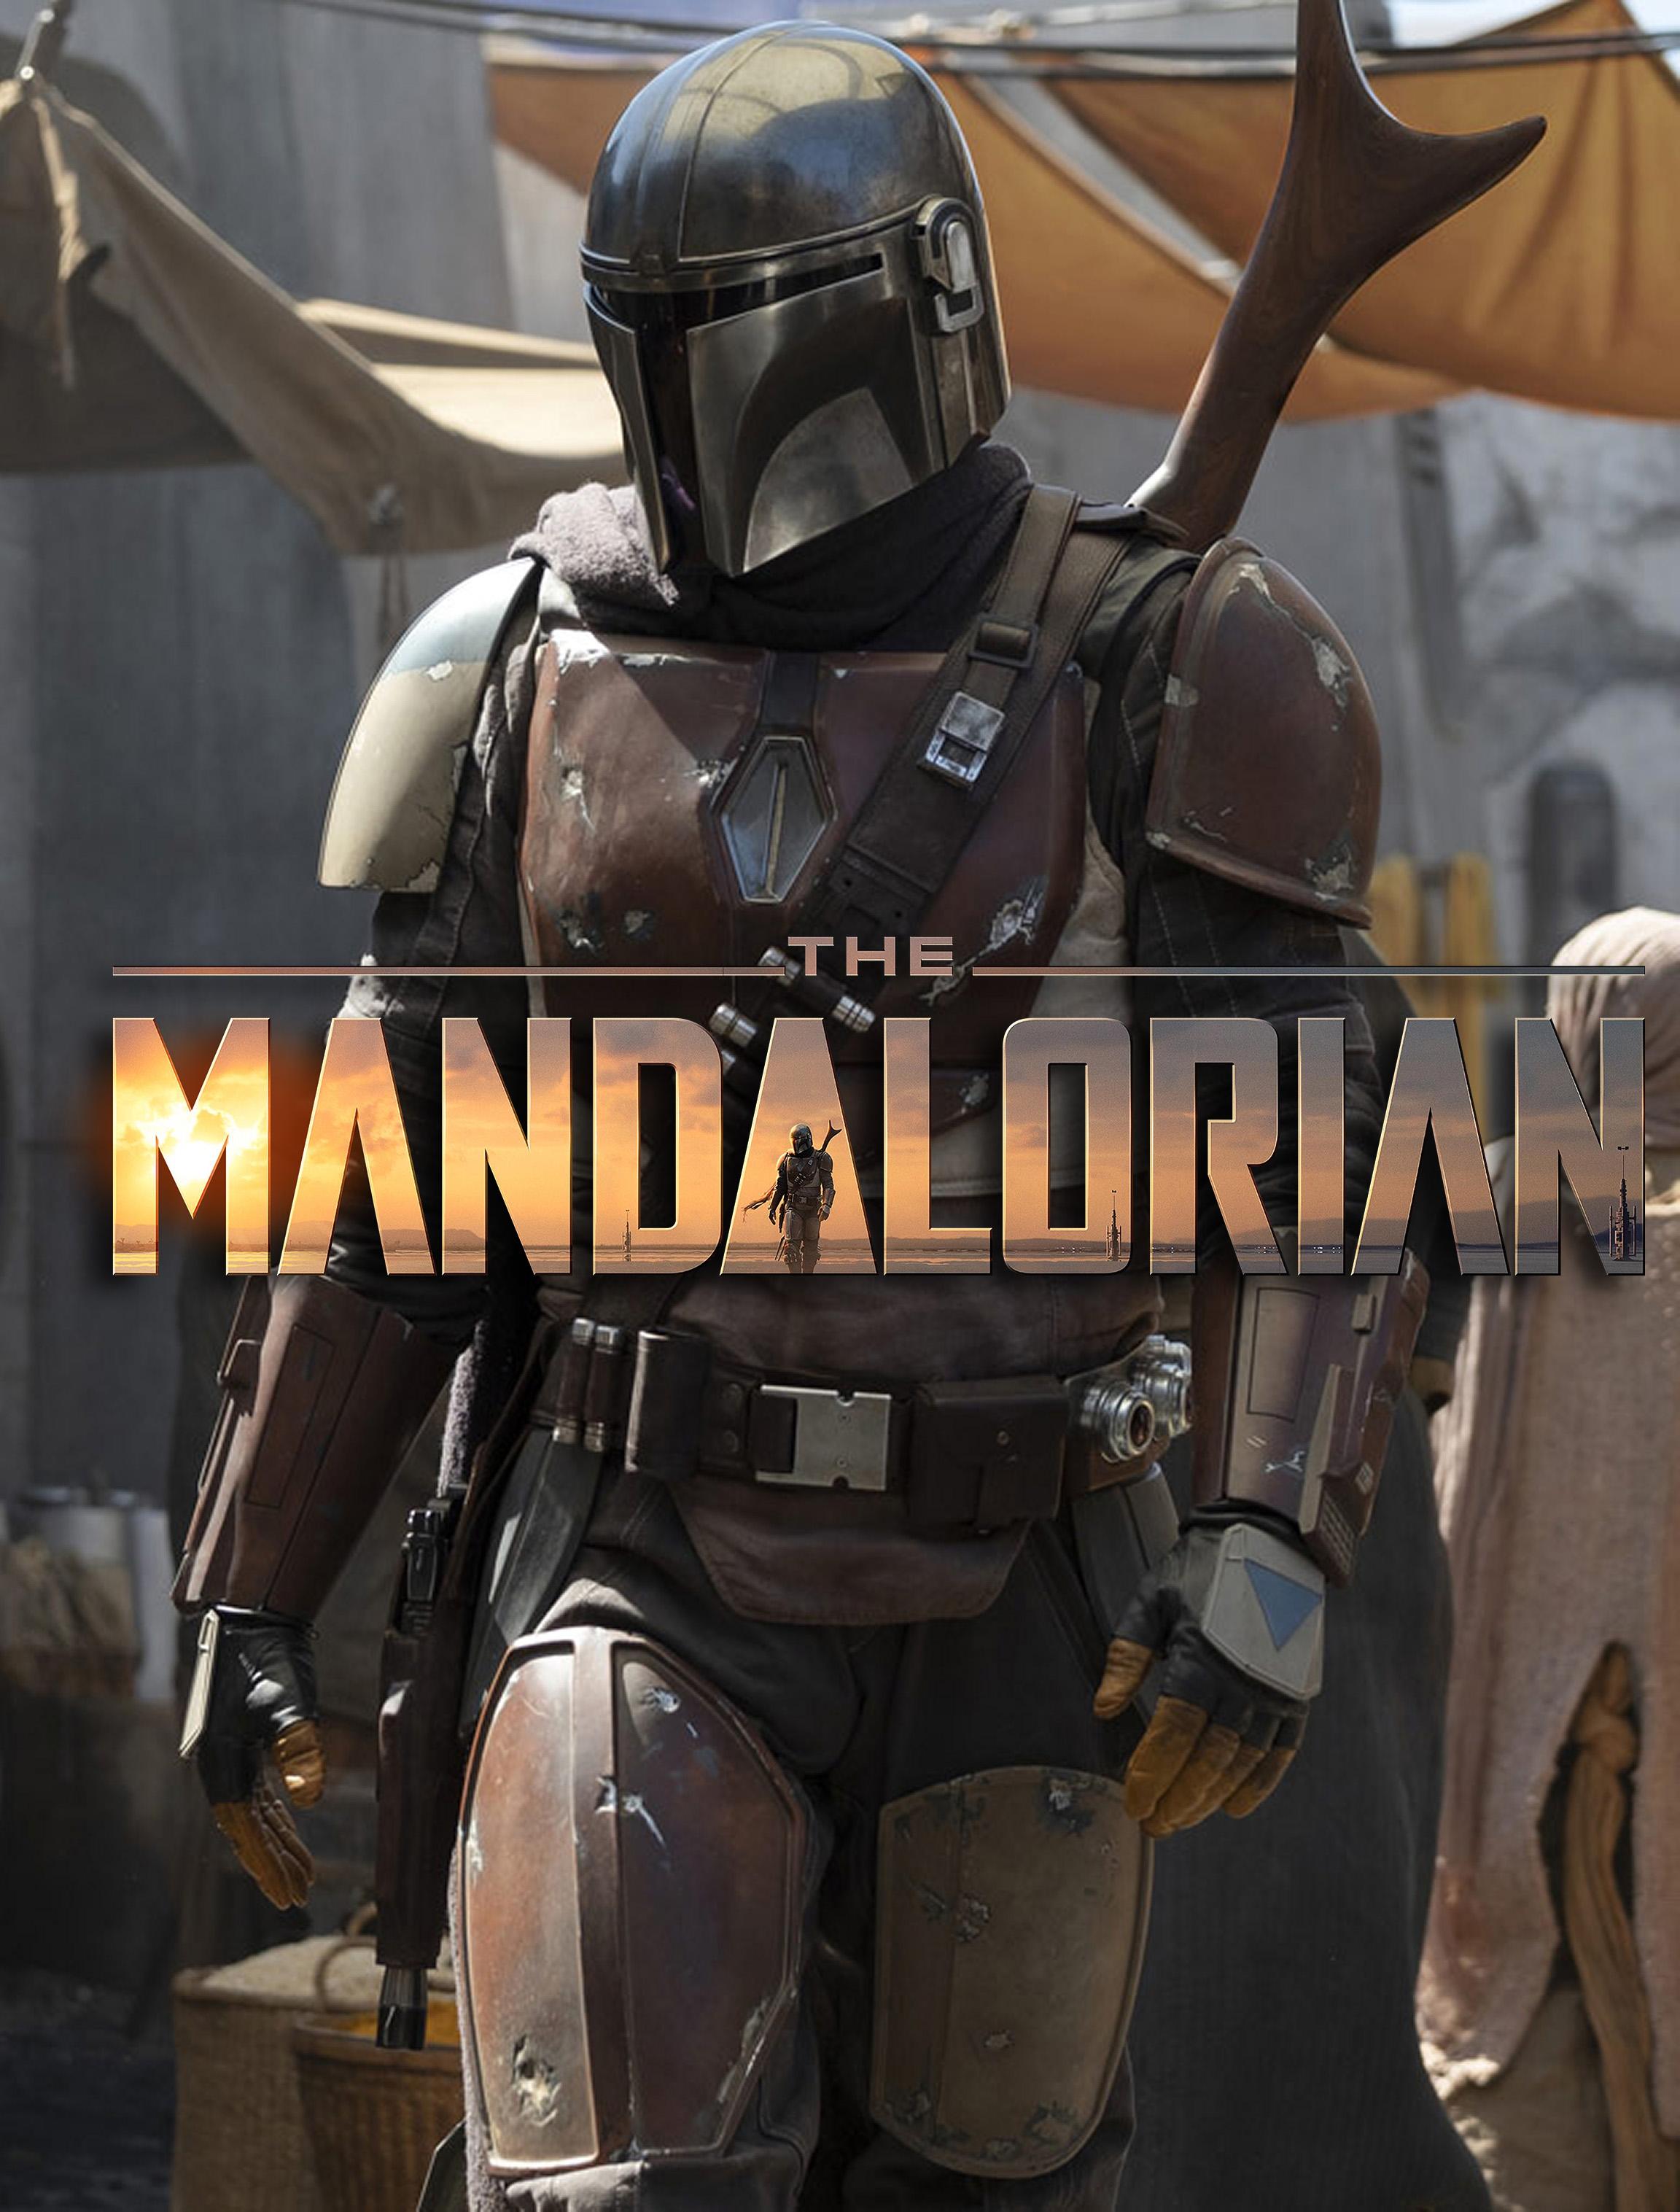 Star Wars: The Mandalorian Official Hi Res Image And Logo's